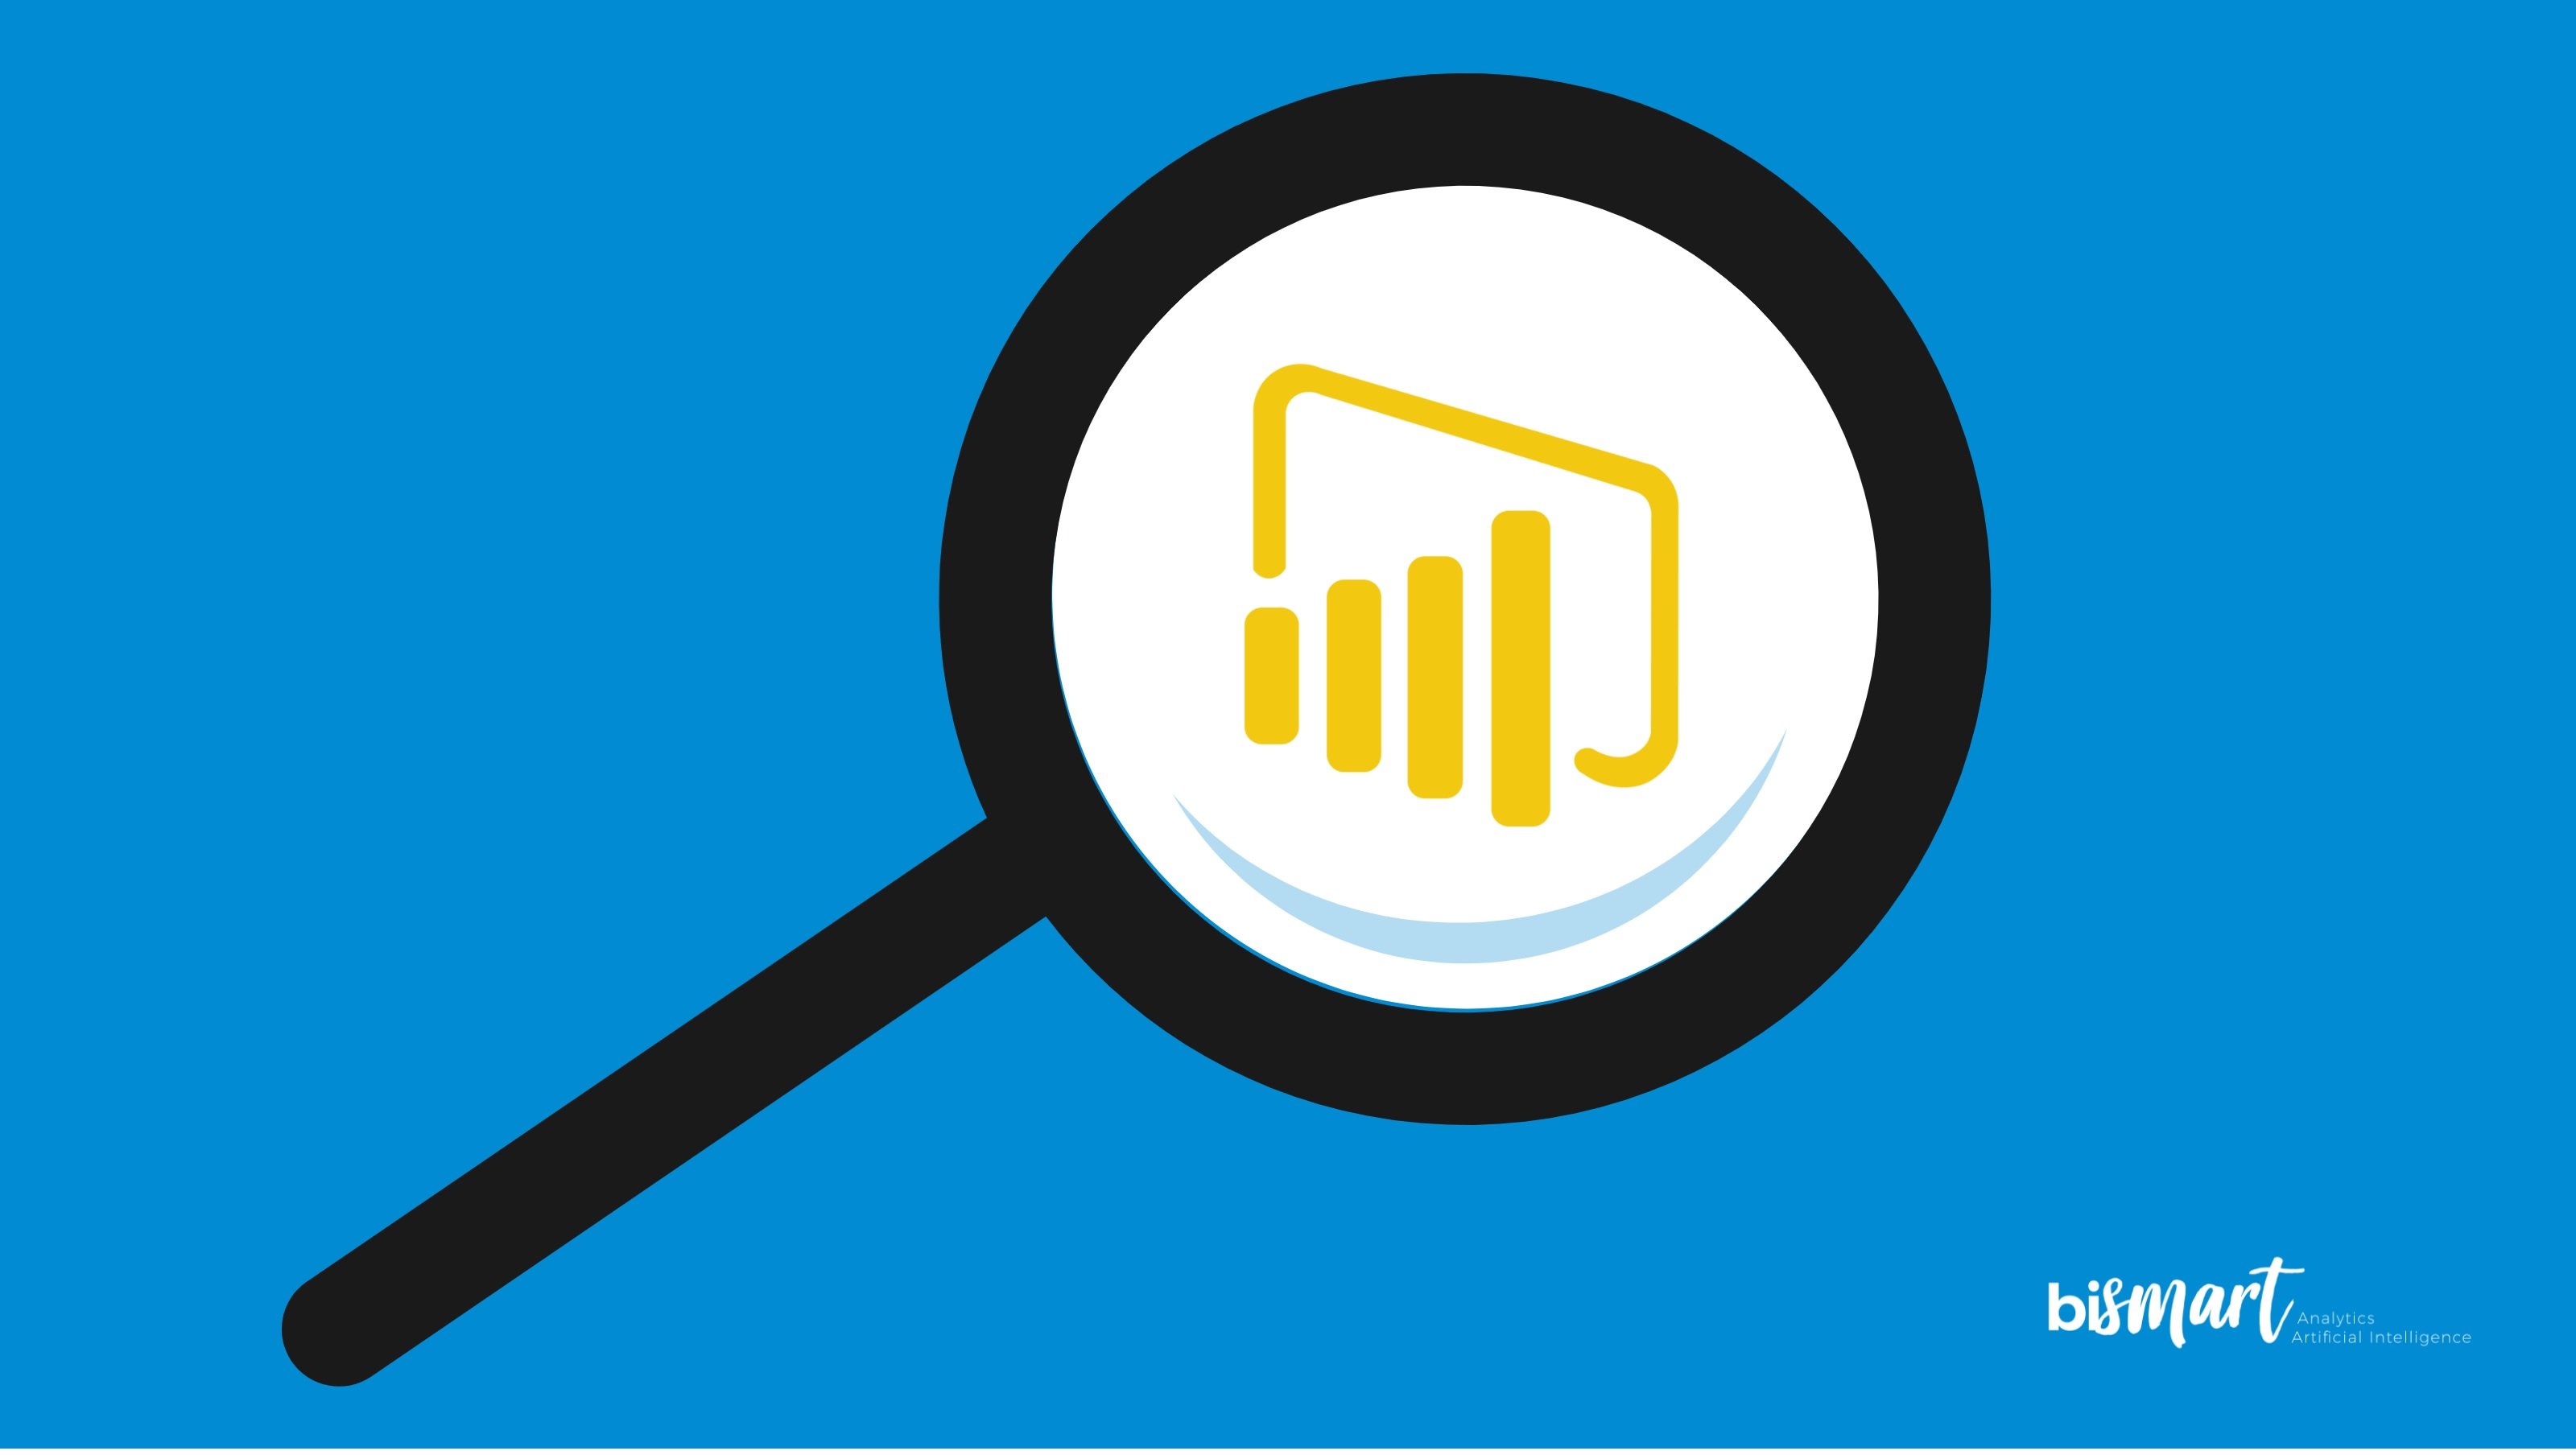 6 Reasons Why You Should Do Data Analytics With Power BI